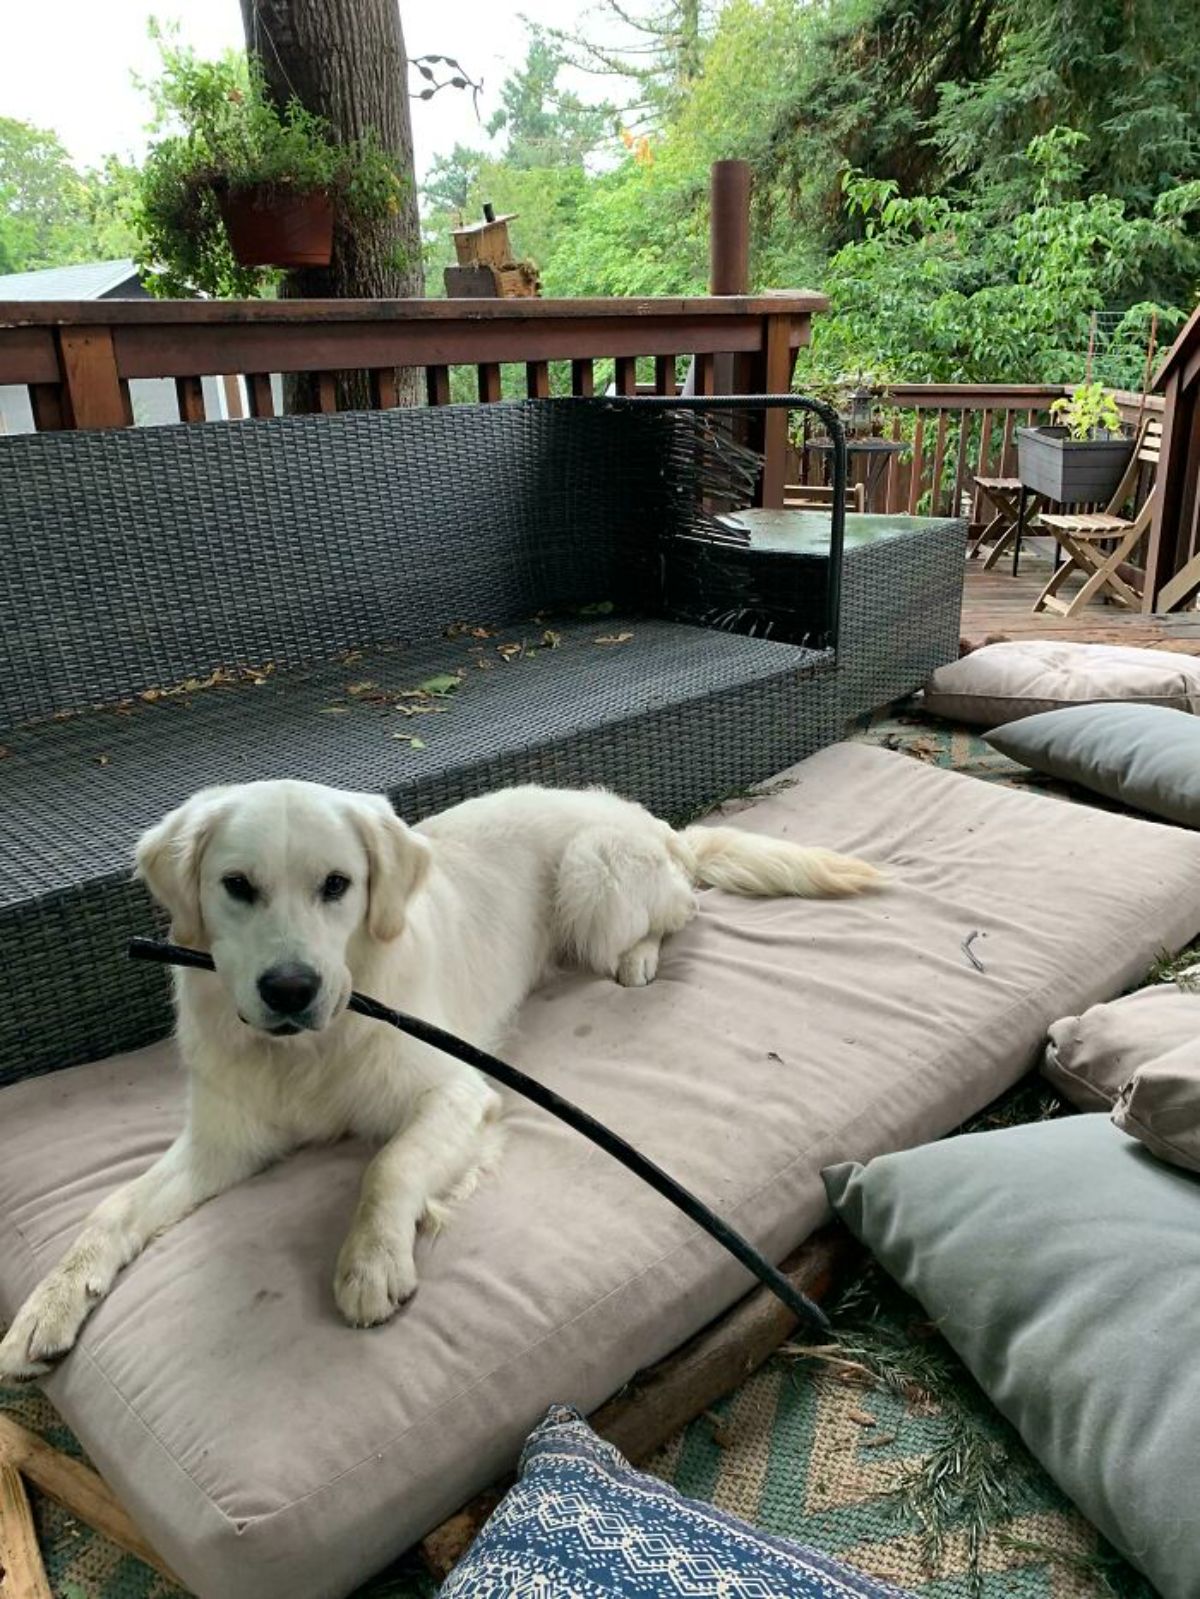 golden retriever laying on a cushion with destroyed outdoor furniture with a pipe from underground irrigation system in its mouth